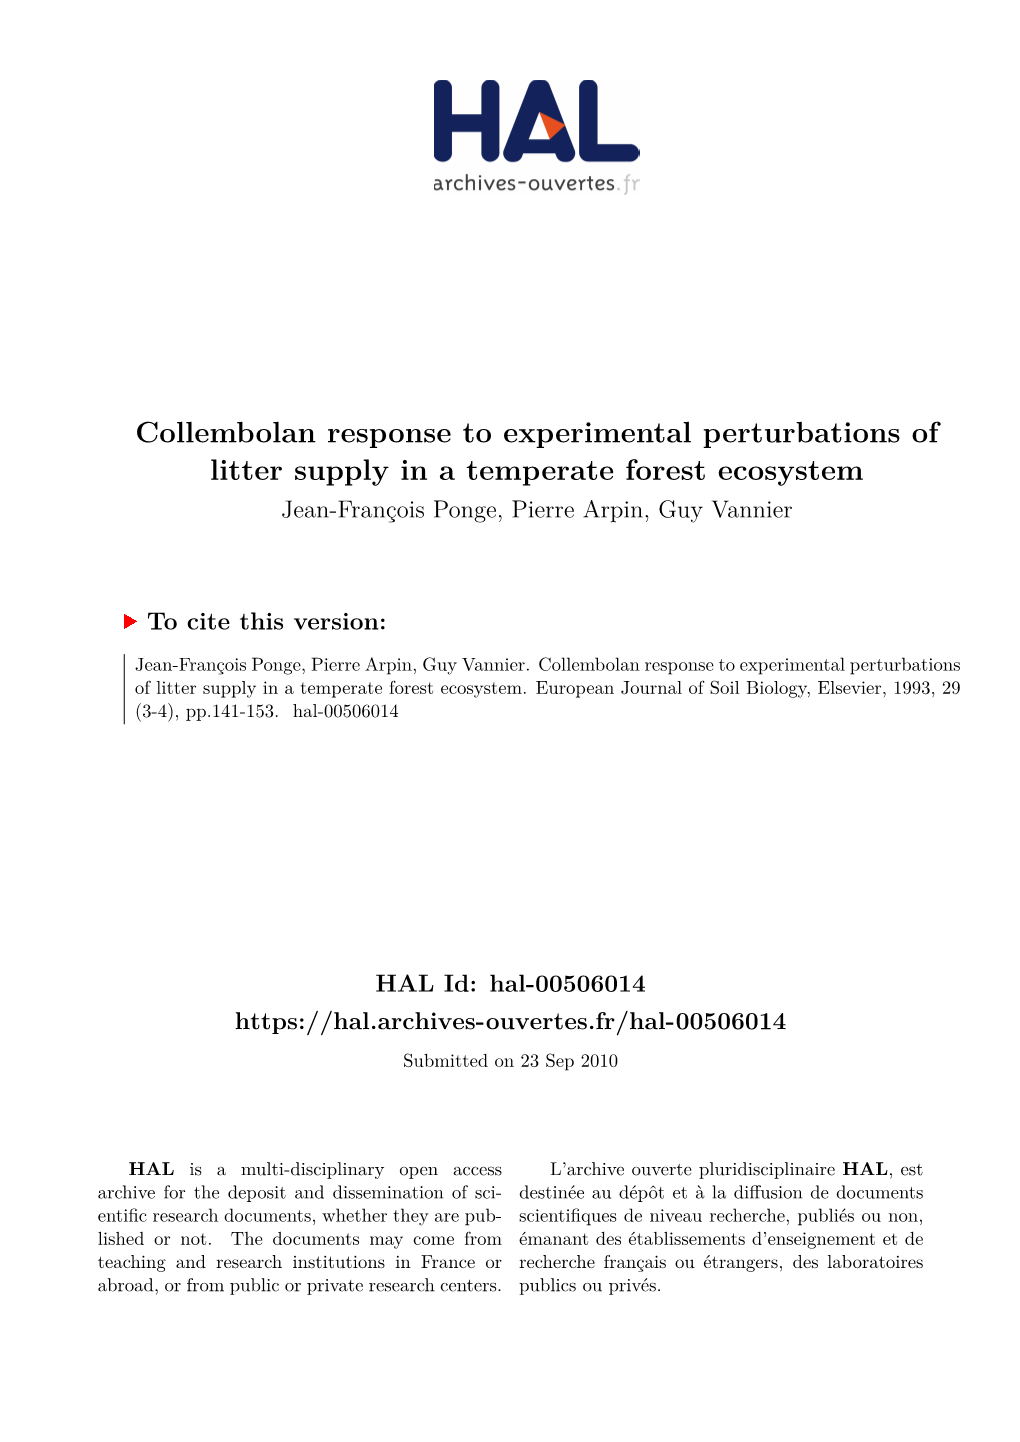 Collembolan Response to Experimental Perturbations of Litter Supply in a Temperate Forest Ecosystem Jean-François Ponge, Pierre Arpin, Guy Vannier